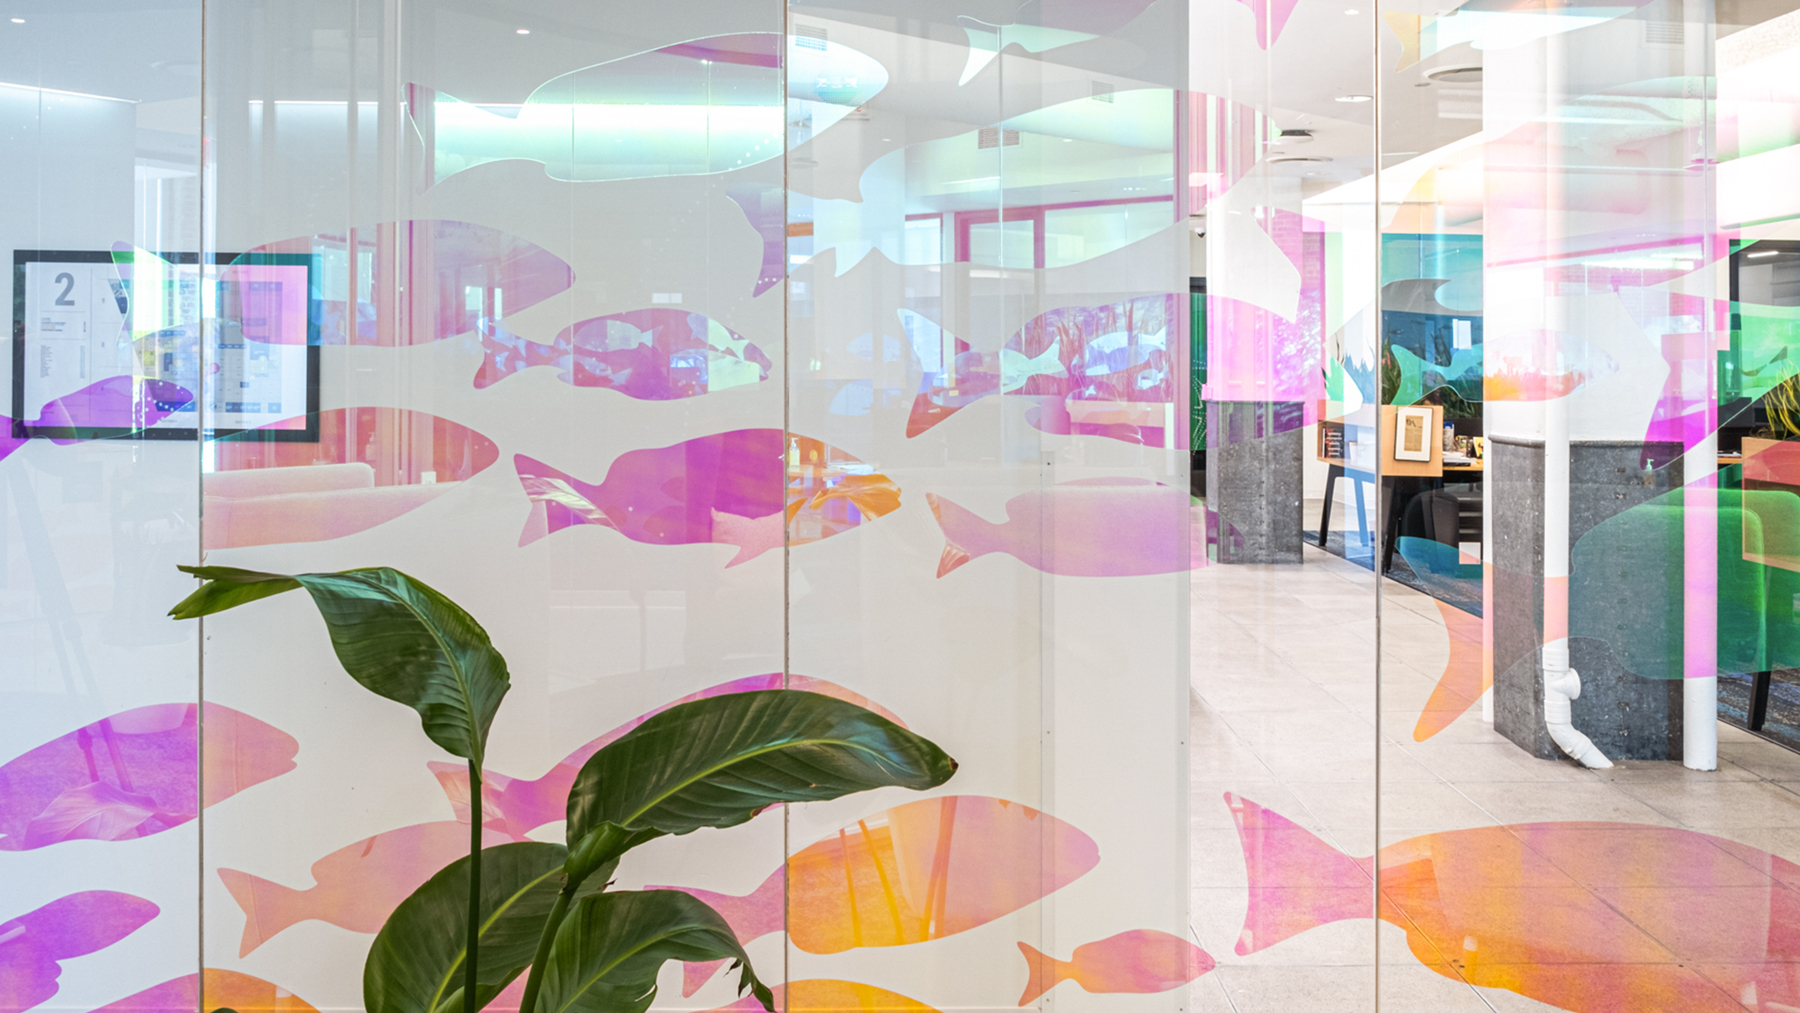 Dichroic graphics on glass depicting fish